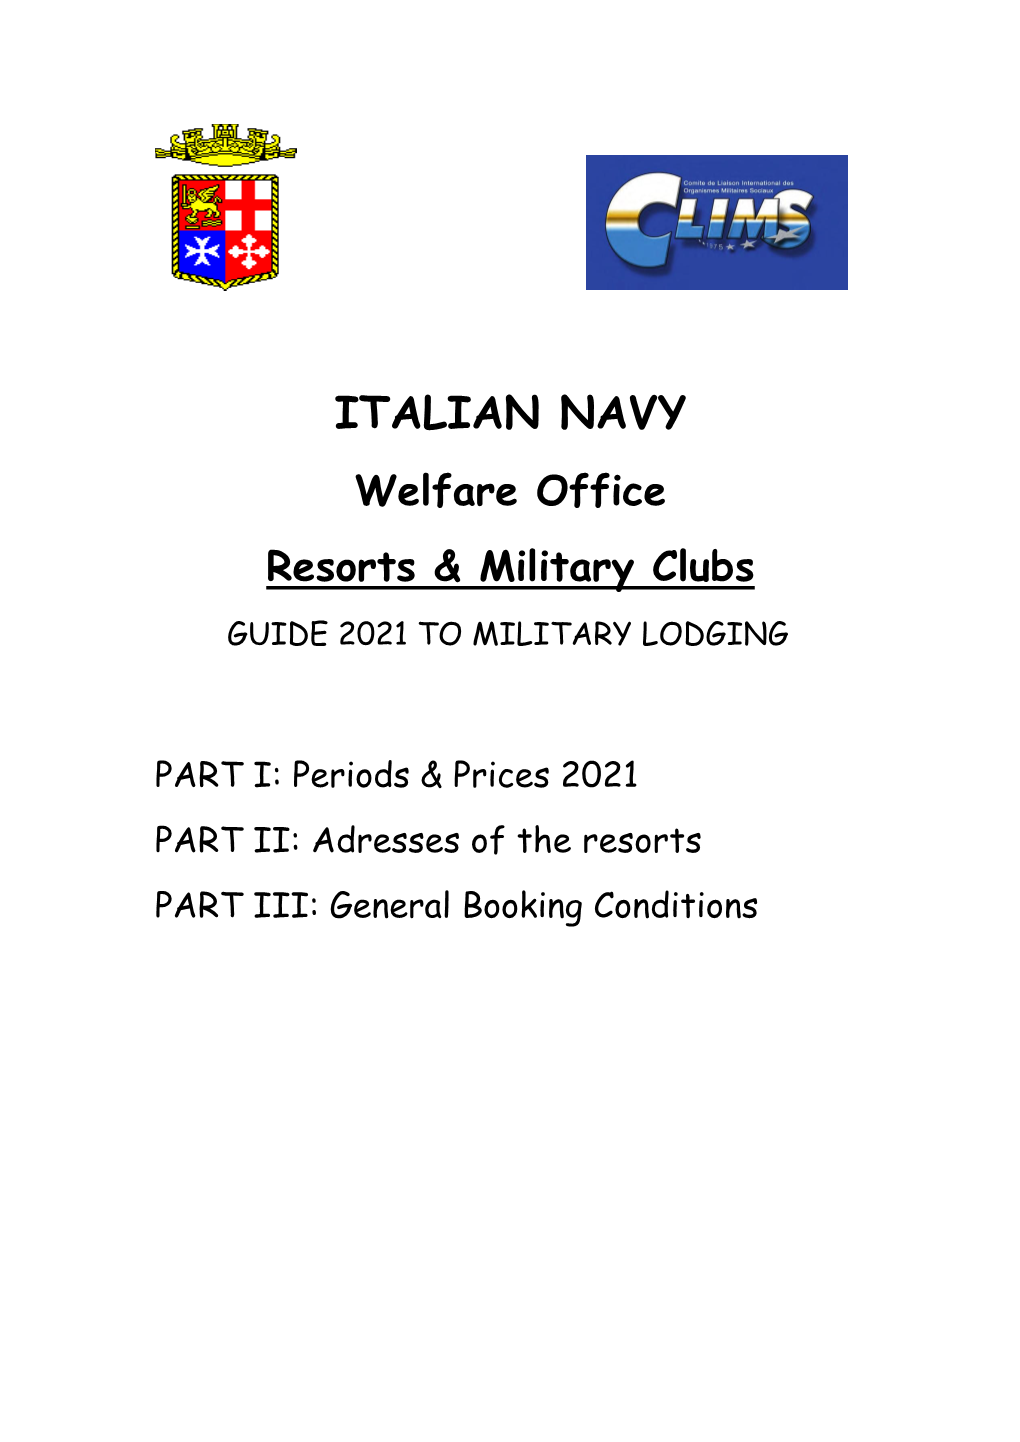 ITALIAN NAVY Welfare Office Resorts & Military Clubs GUIDE 2021 to MILITARY LODGING